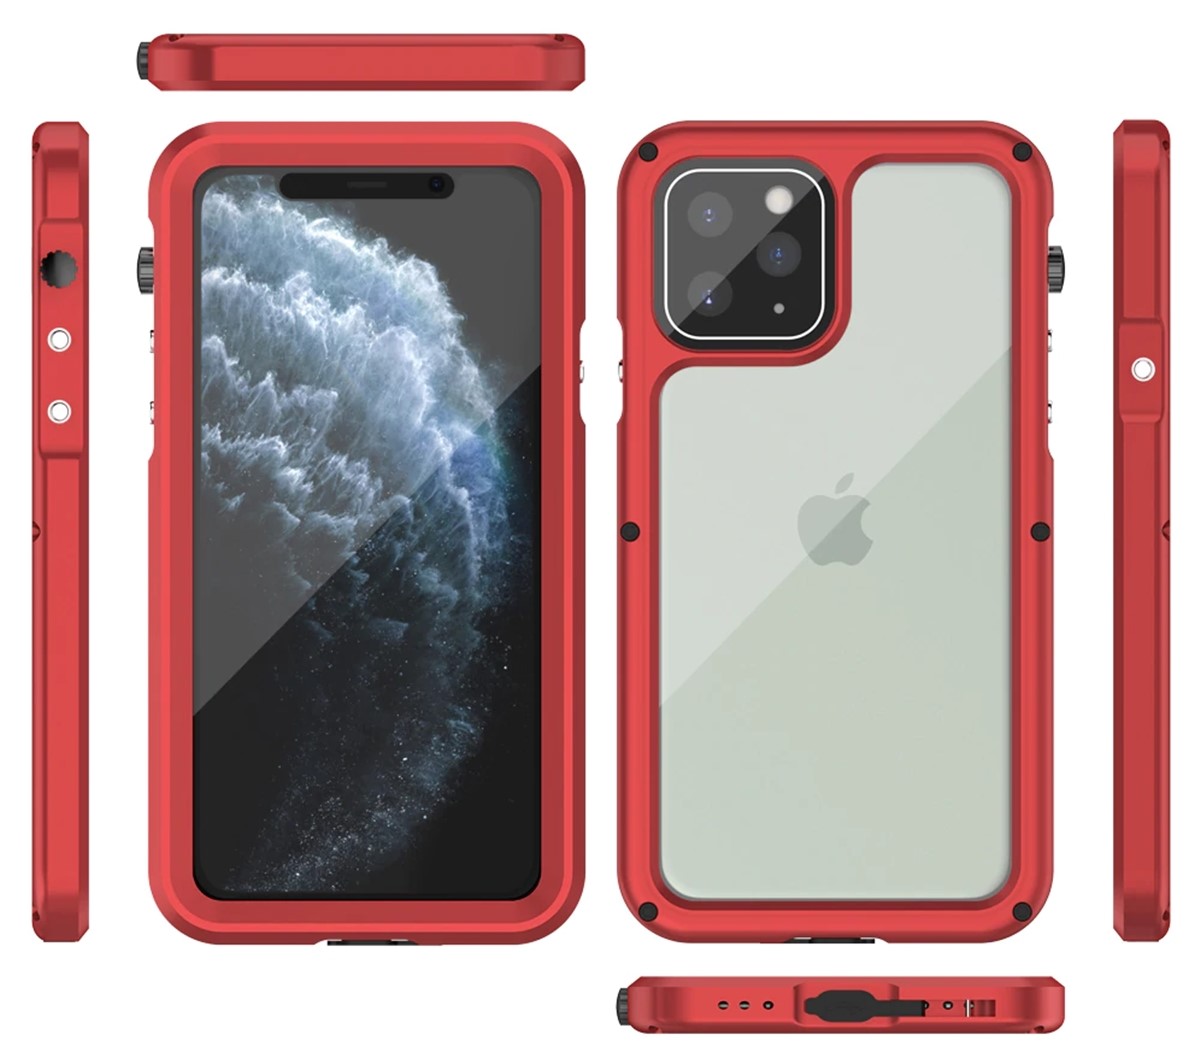 Best dropshipping tech products: Waterproof Floating Phone and Tablet Cases